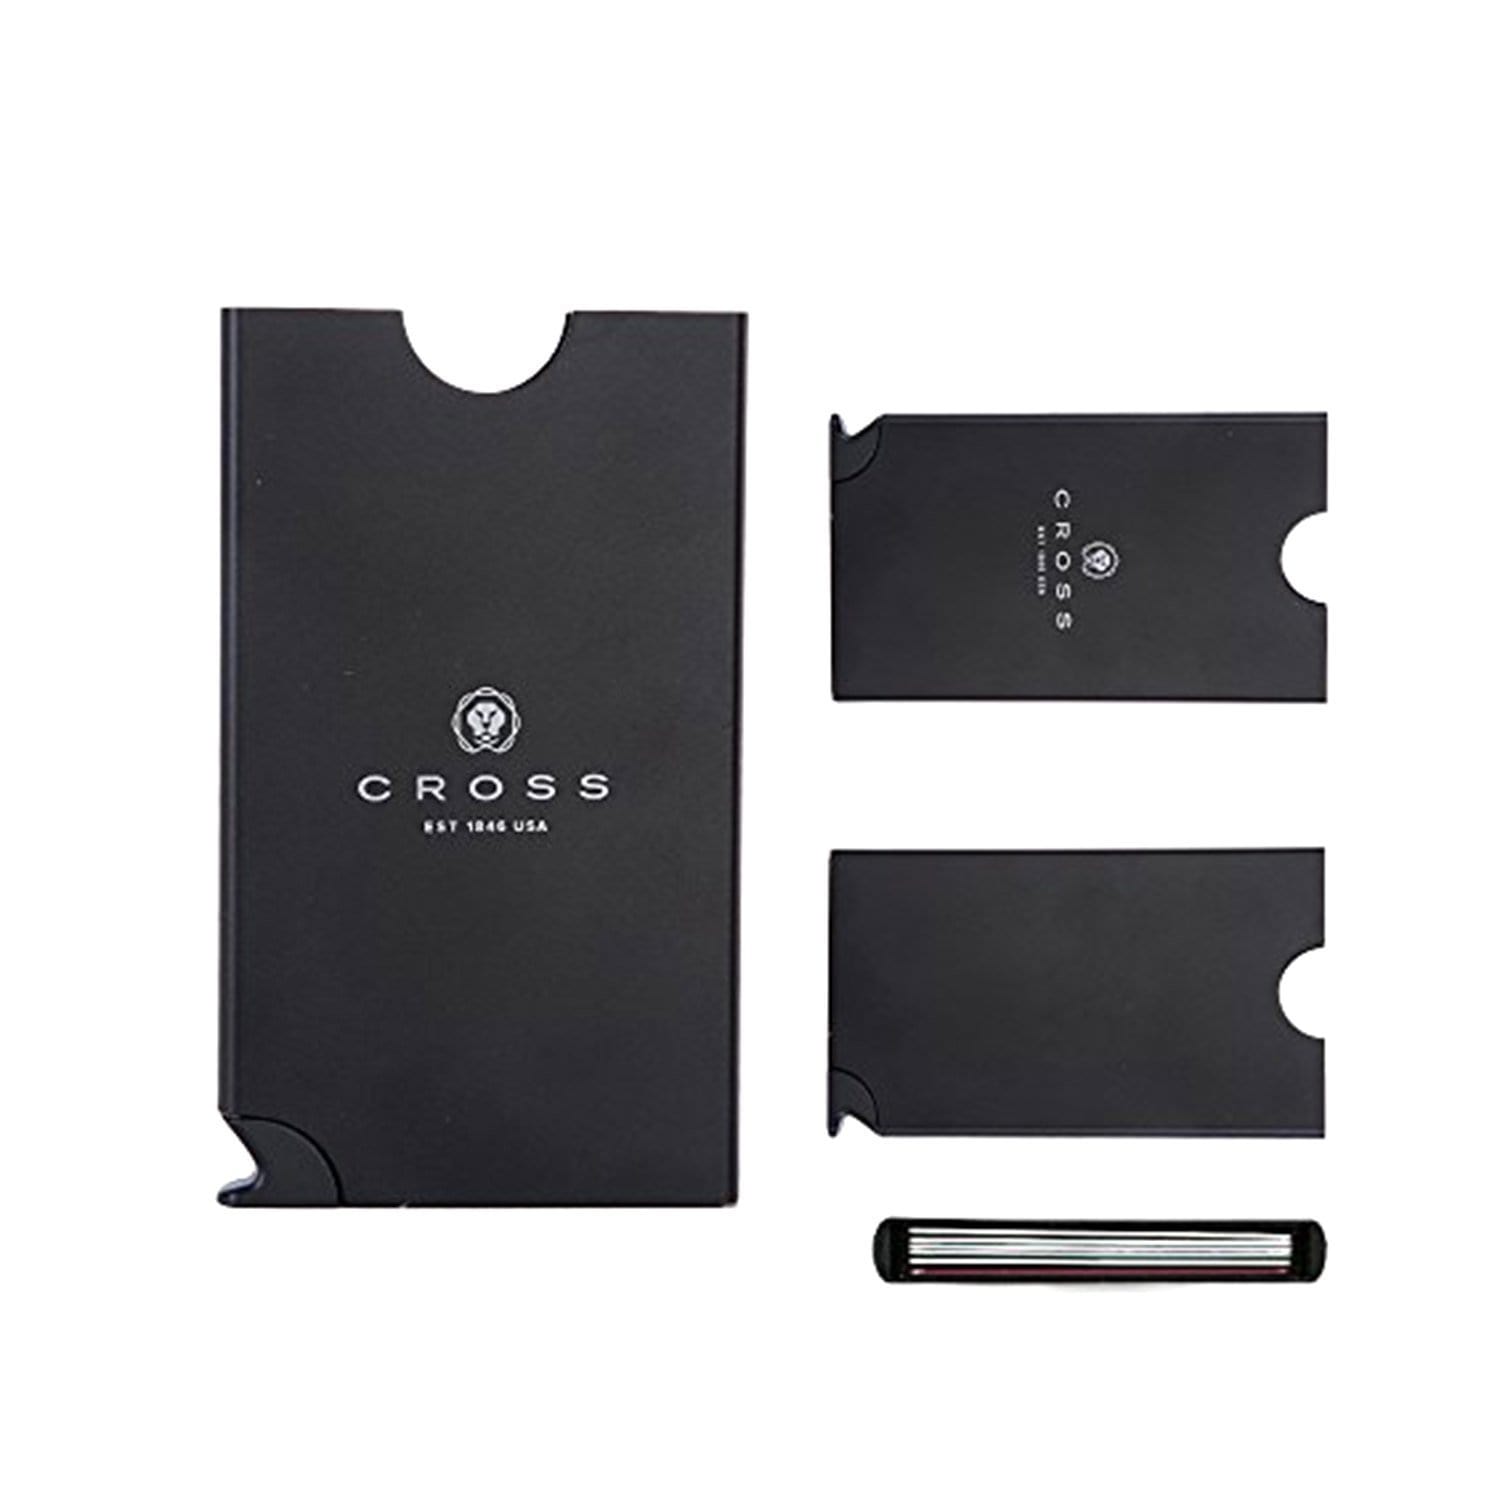 Cross Techno Value Automatic Card Case Wallet with RFID - Black - ACO1768694 -2-1 - Jashanmal Home